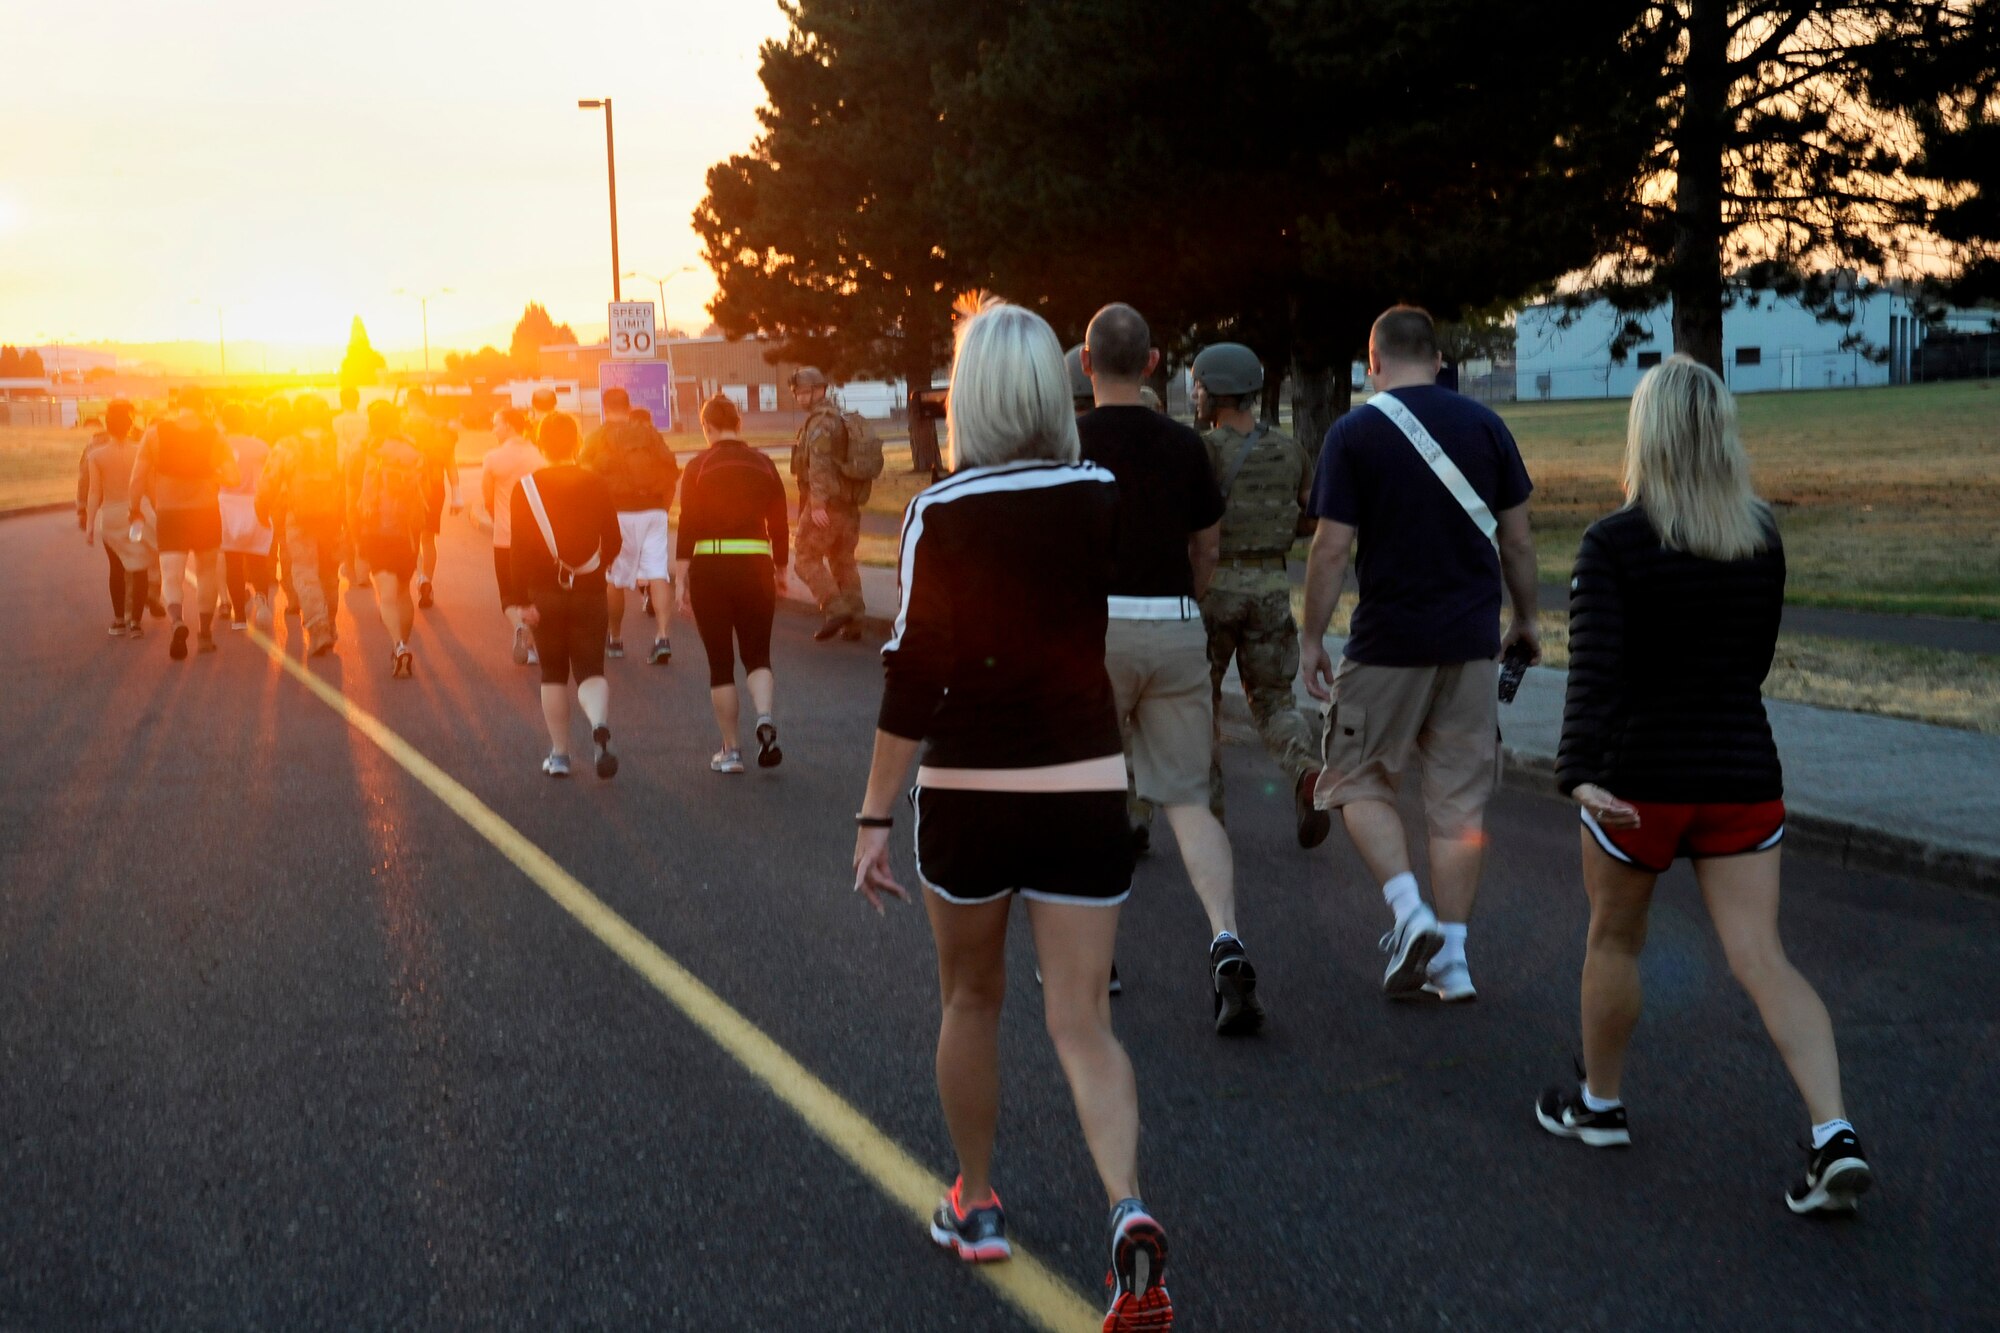 Participants from the 142nd Fighter Wing and 304th Rescue Squadron move along the route of the ‘Ruck, Run and Walk’, as the sunrise covers the Portland Air National Guard Base, Ore., Sept. 11, 2015. (U.S. Air National Guard photo by Tech. Sgt. John Hughel, 142nd Fighter Wing Public Affair/Released)